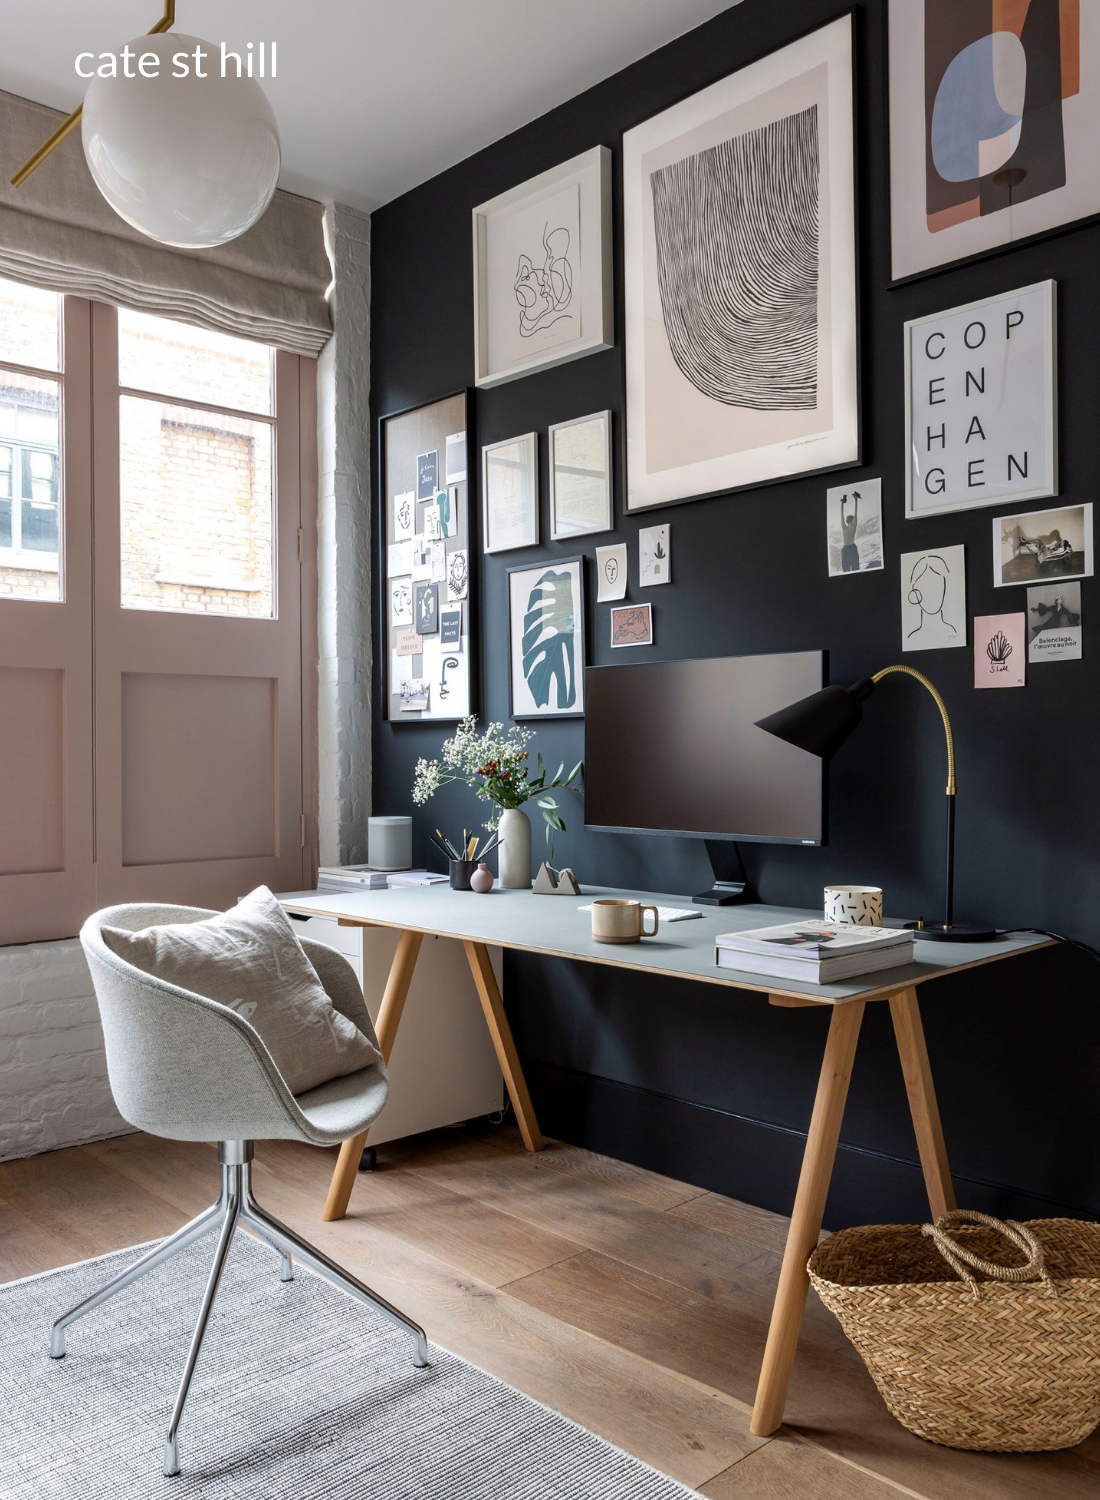 Home office inspiration to help you decide your WFH style